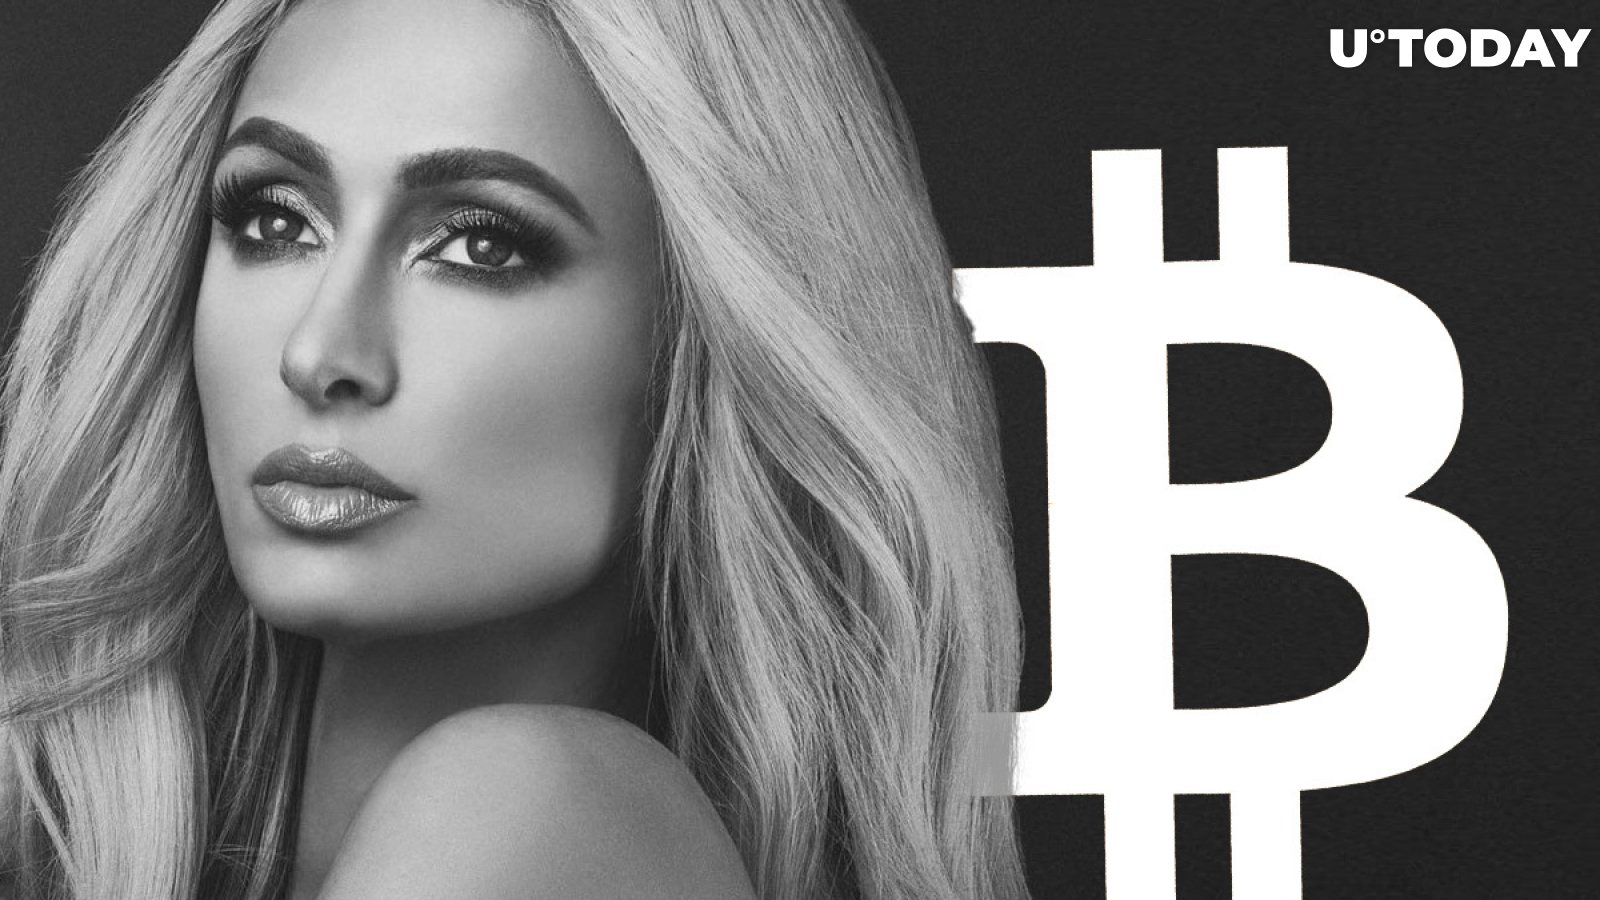 Paris Hilton Is "Very, Very Excited" About Bitcoin